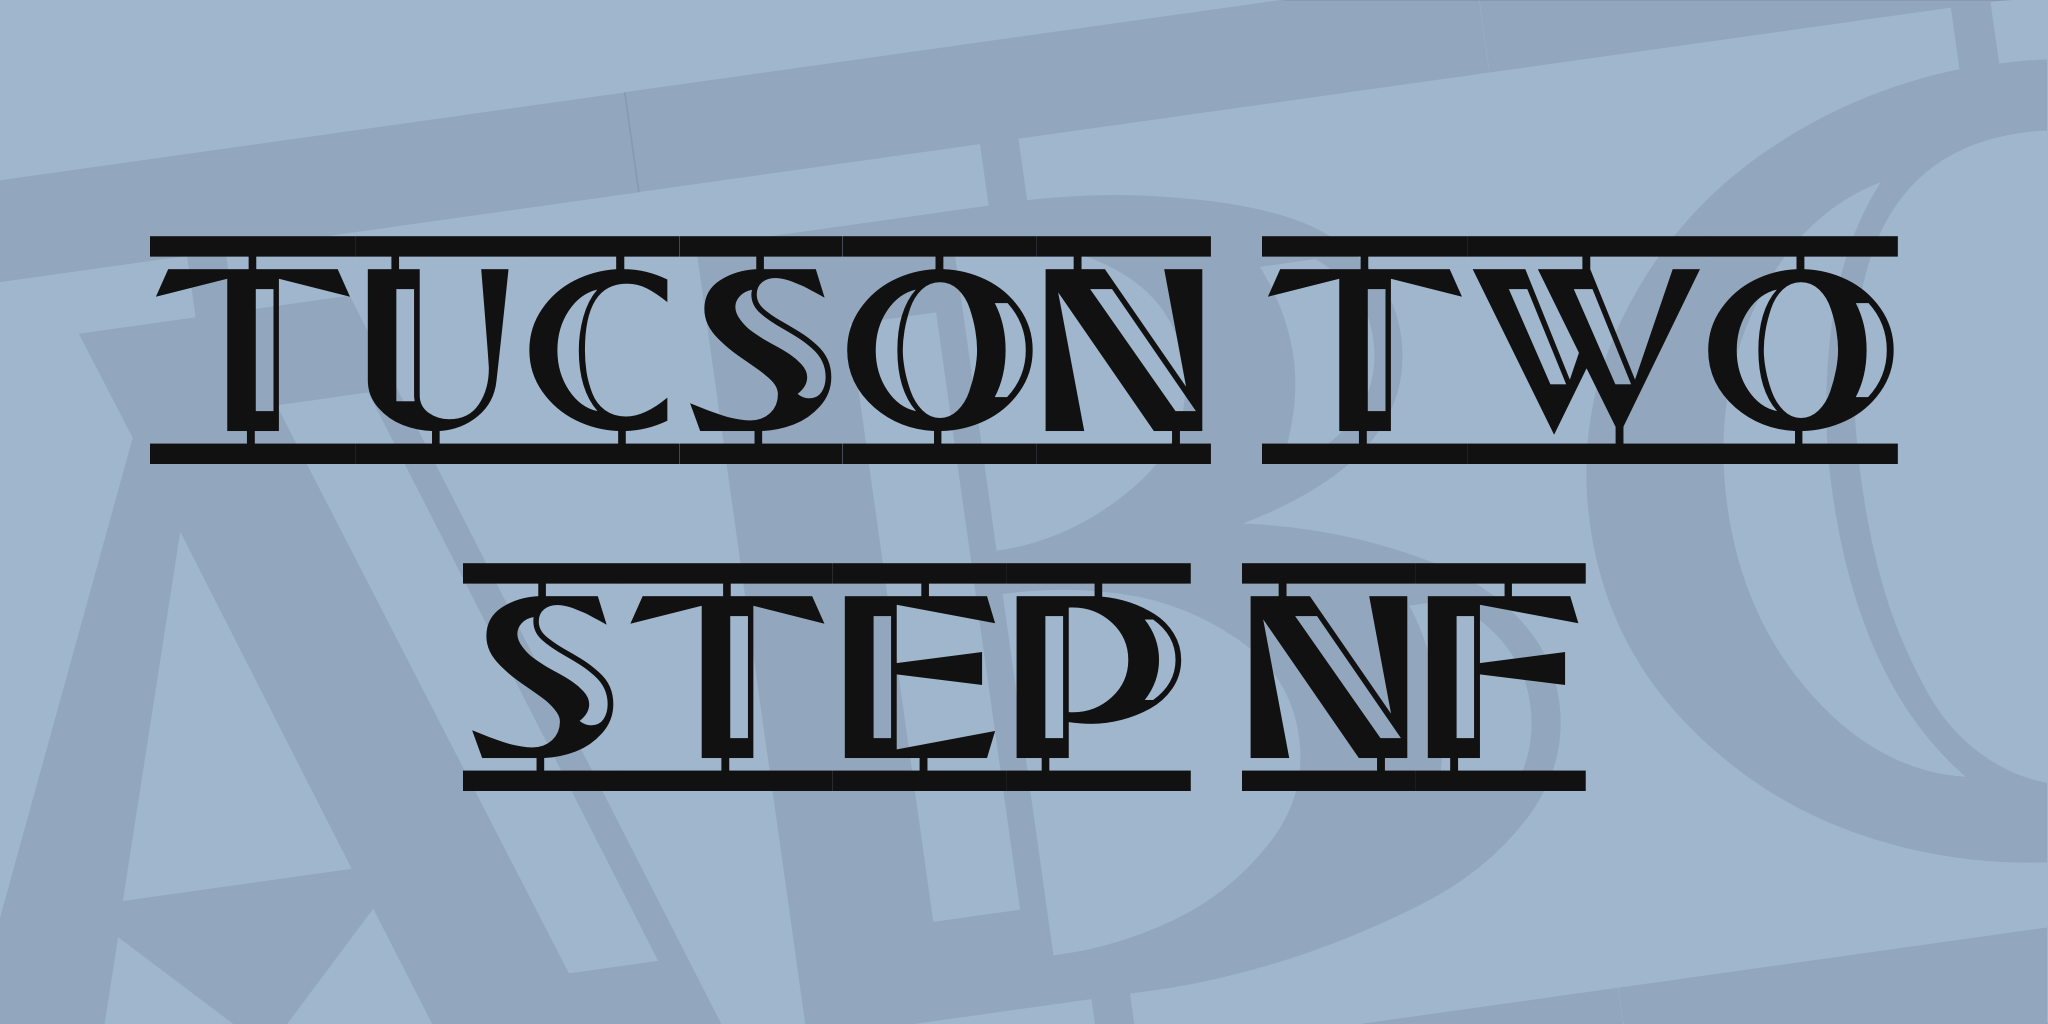 Tucson Two Step Nf